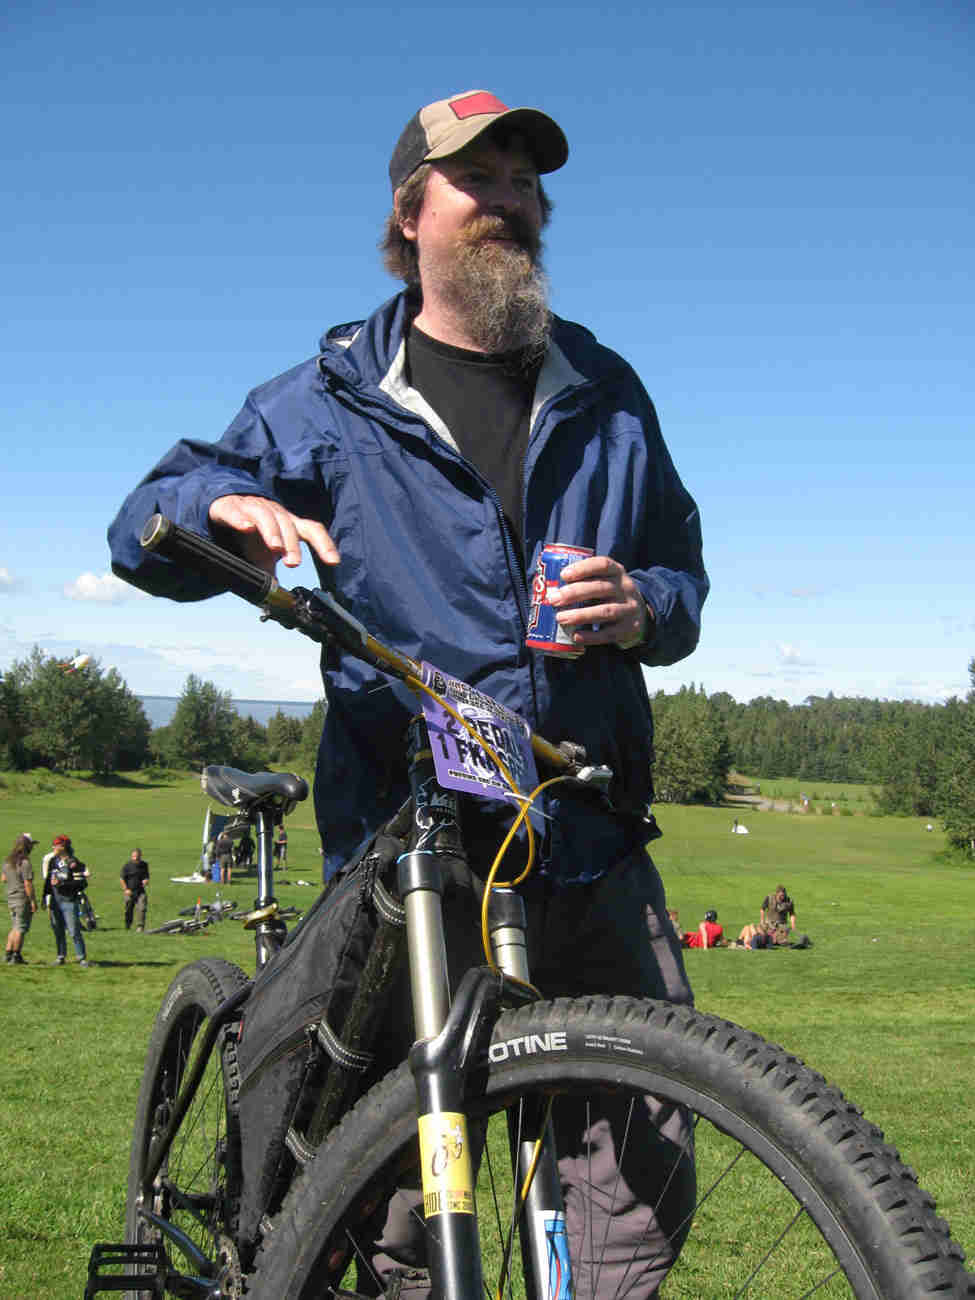 Front view of a Surly bike with a cyclist standing on the left side, on a grass field with people behind them